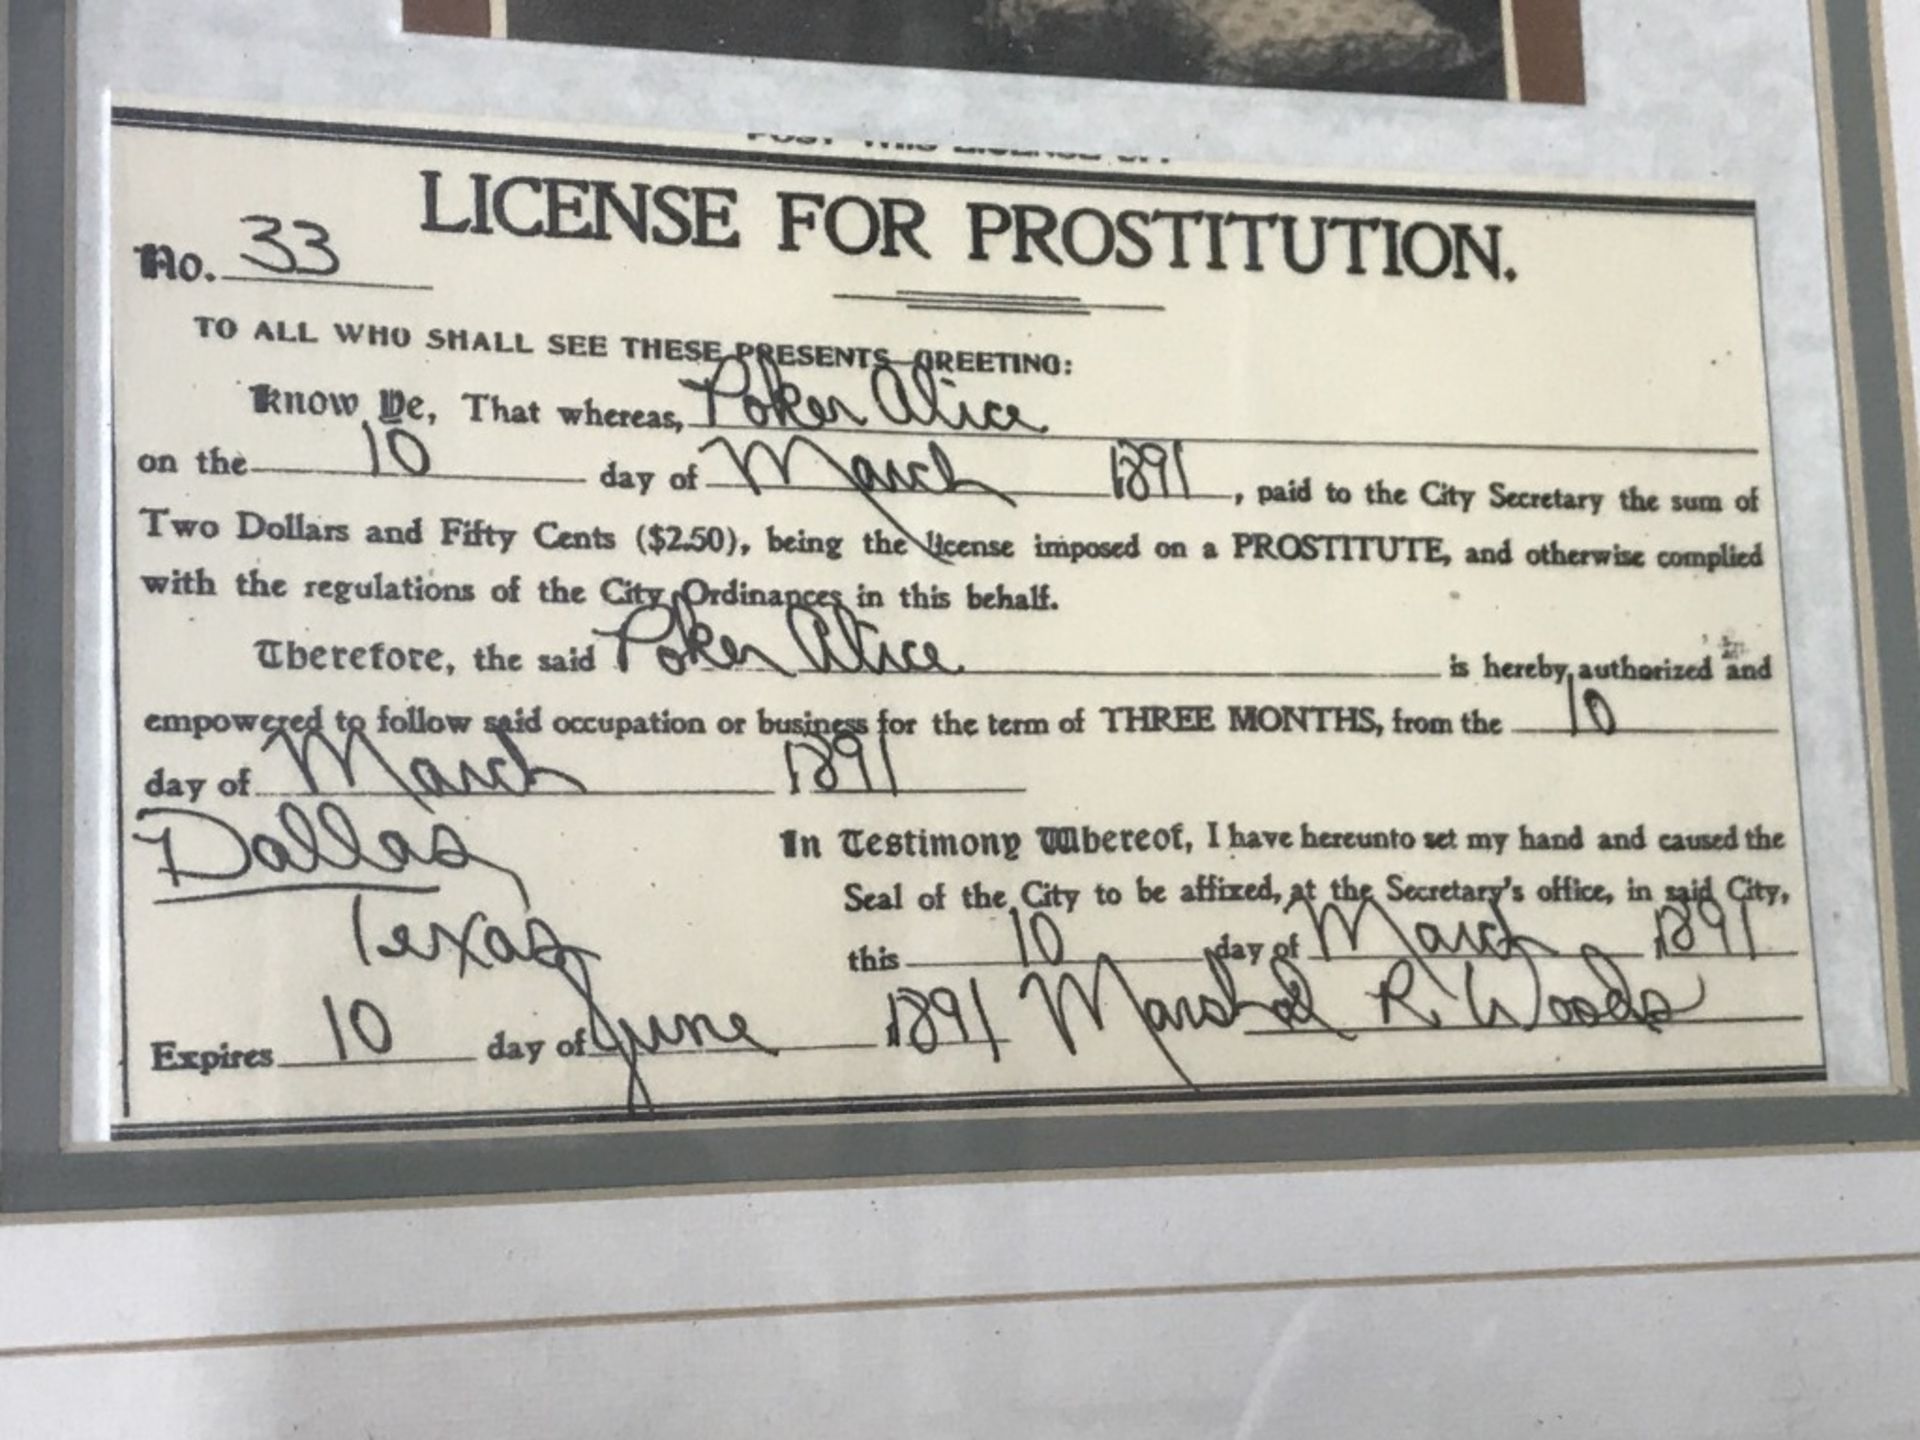 License for Prostitution - Image 7 of 7